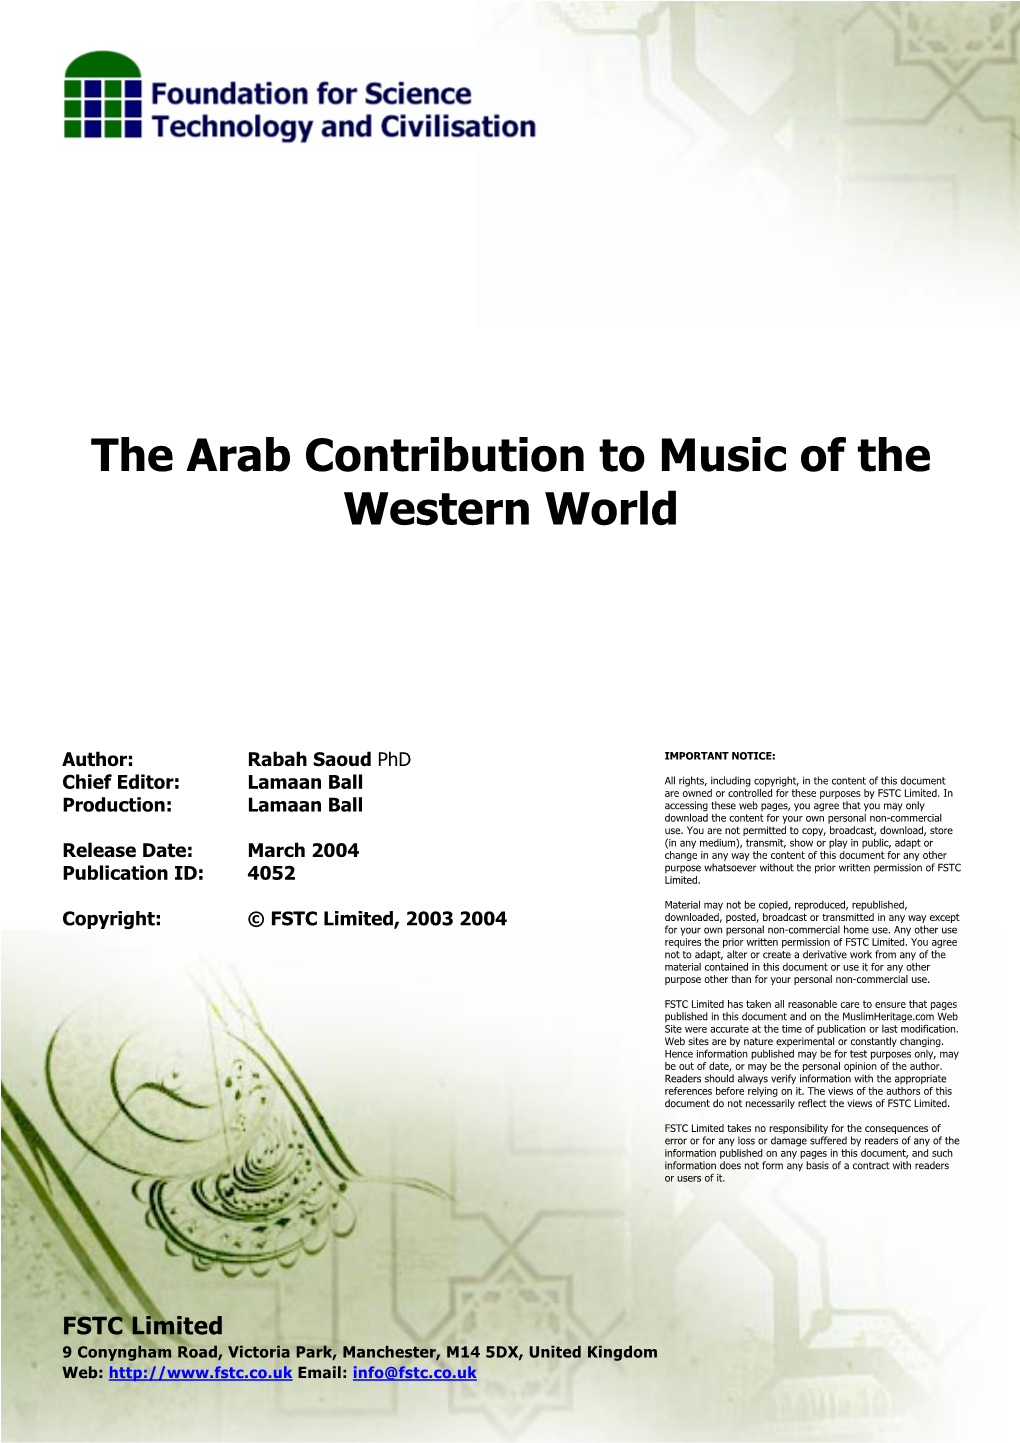 The Arab Contribution to Music of the Western World March 2004